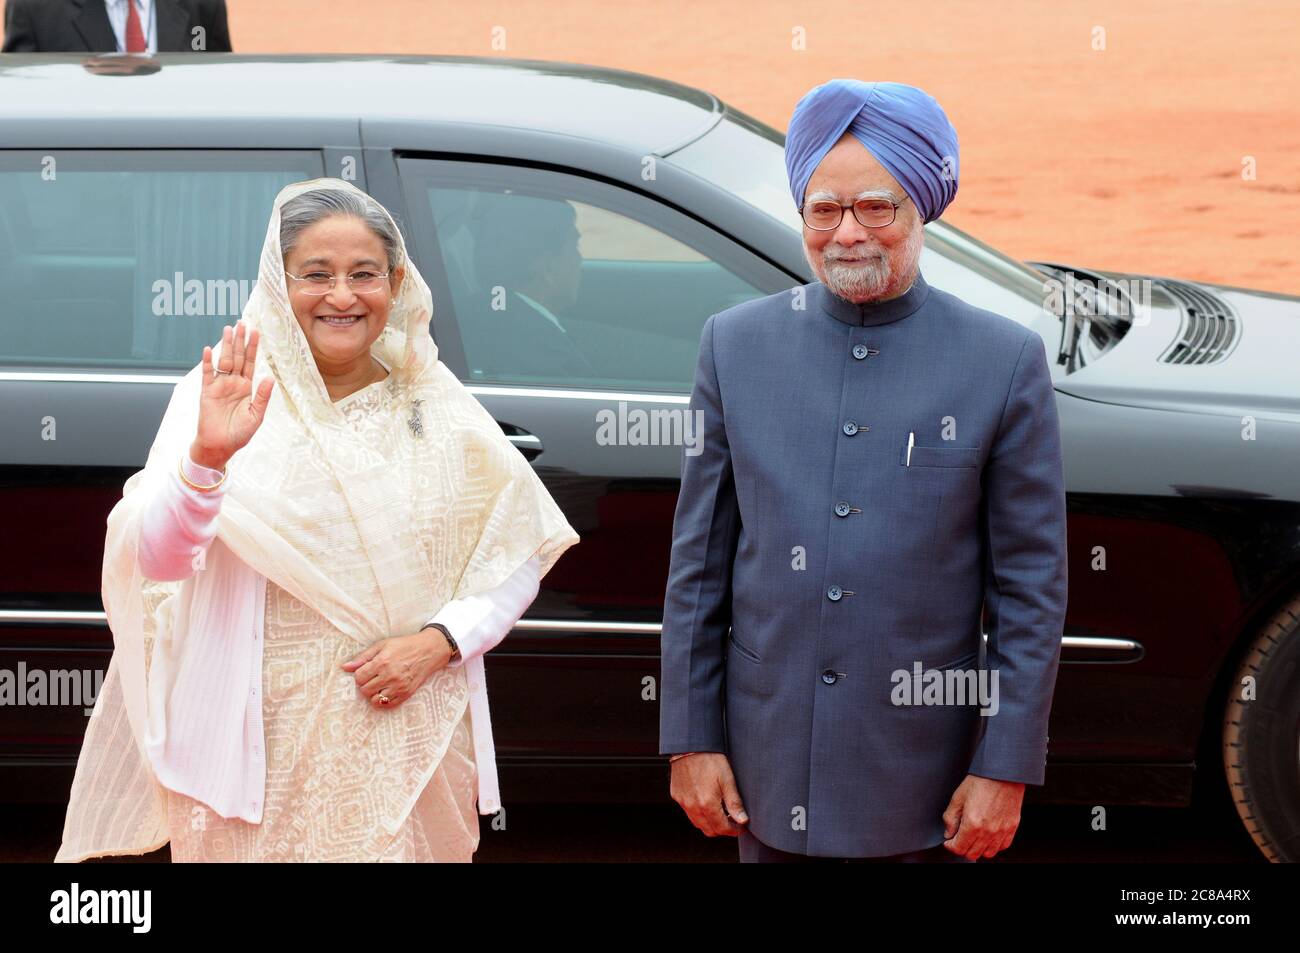 File photograph of Bangladesh Prime Minister Sheikh Hasina with Indian Prime Minister Manmohan Singh in New Delhi, India - 2010. They discussed entire Stock Photo